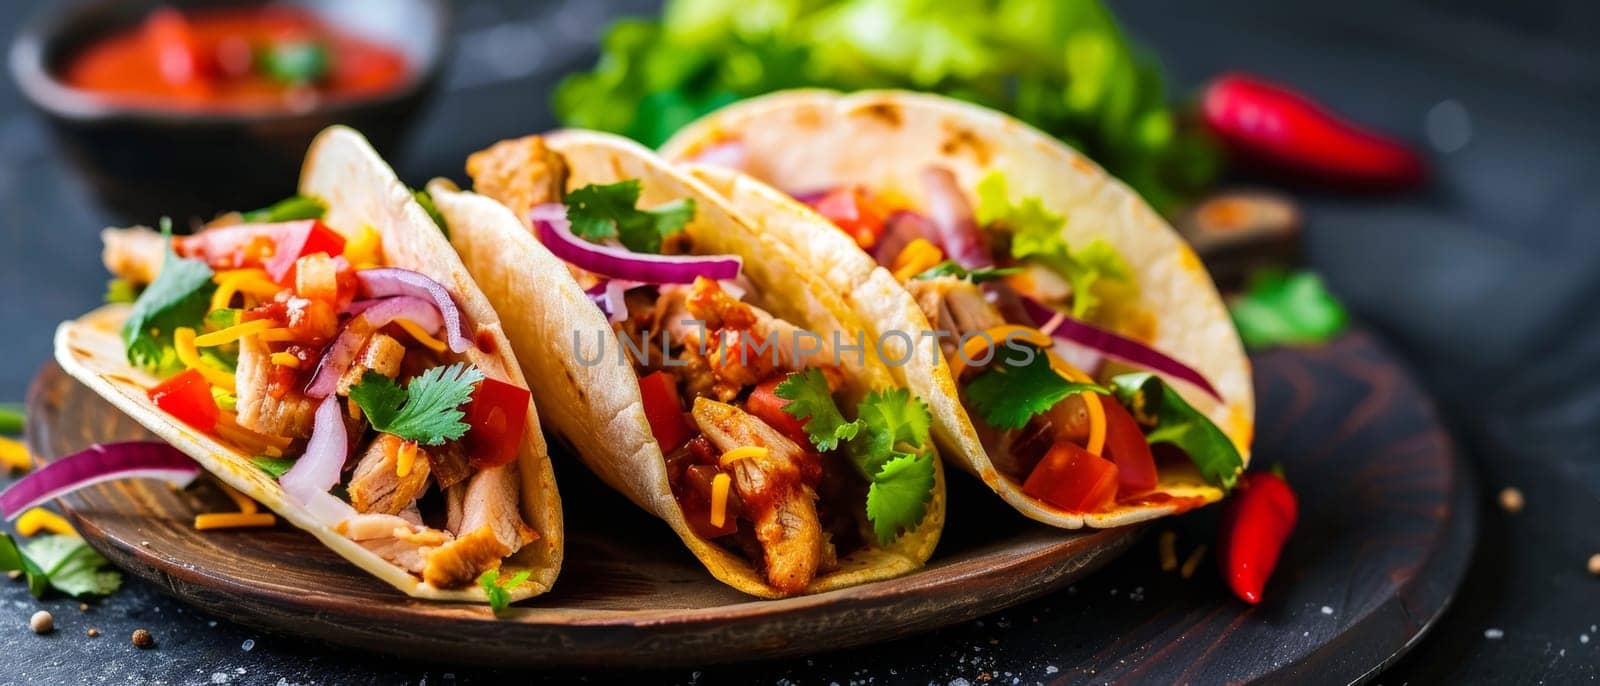 Soft tacos filled with grilled chicken, adorned with colorful bell peppers, red onion, and a sprinkle of cheese, presented on a dark plate